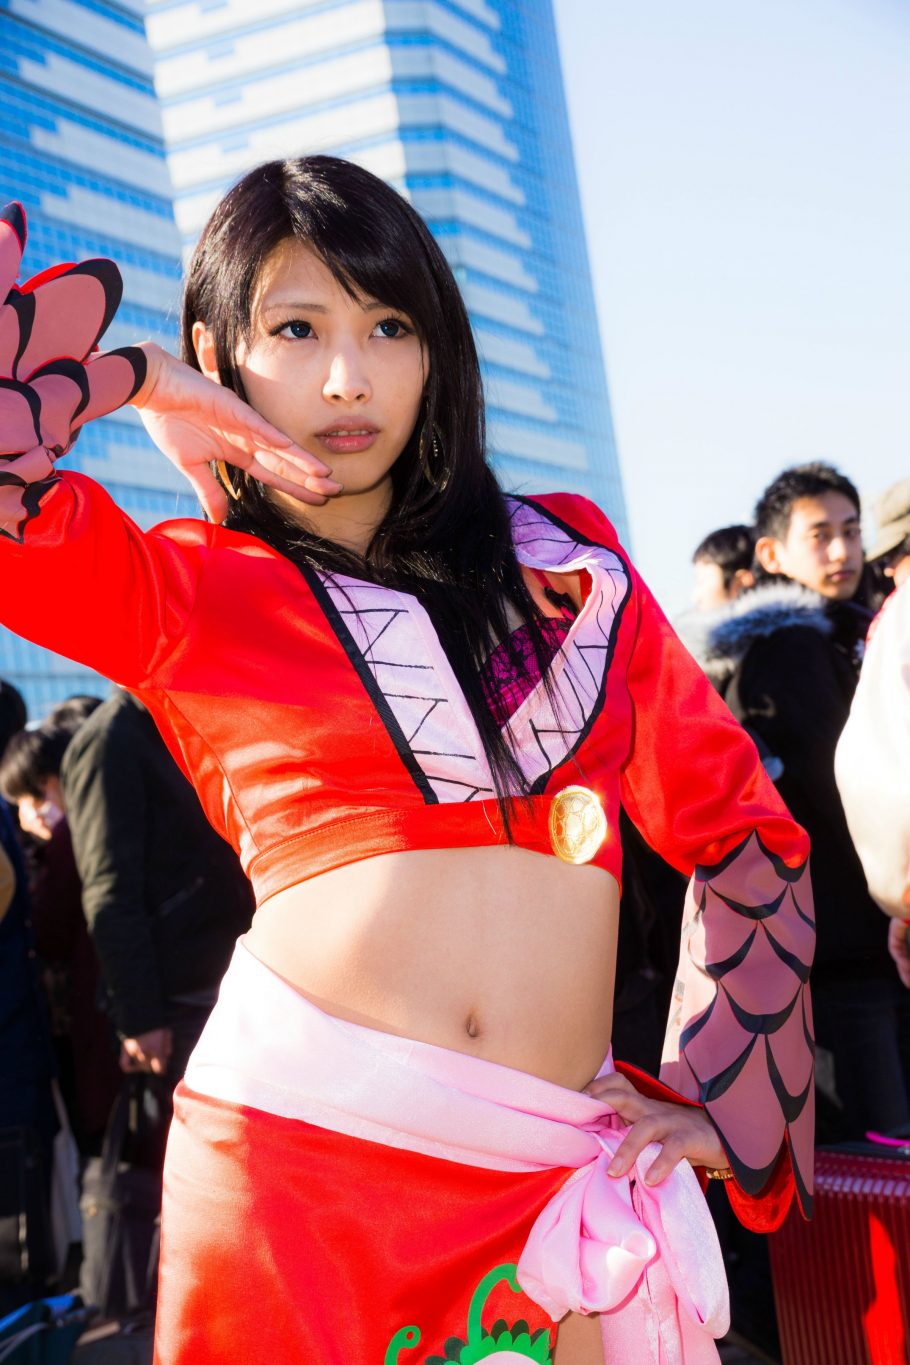 Sexy Cosplay comiket 2013 22